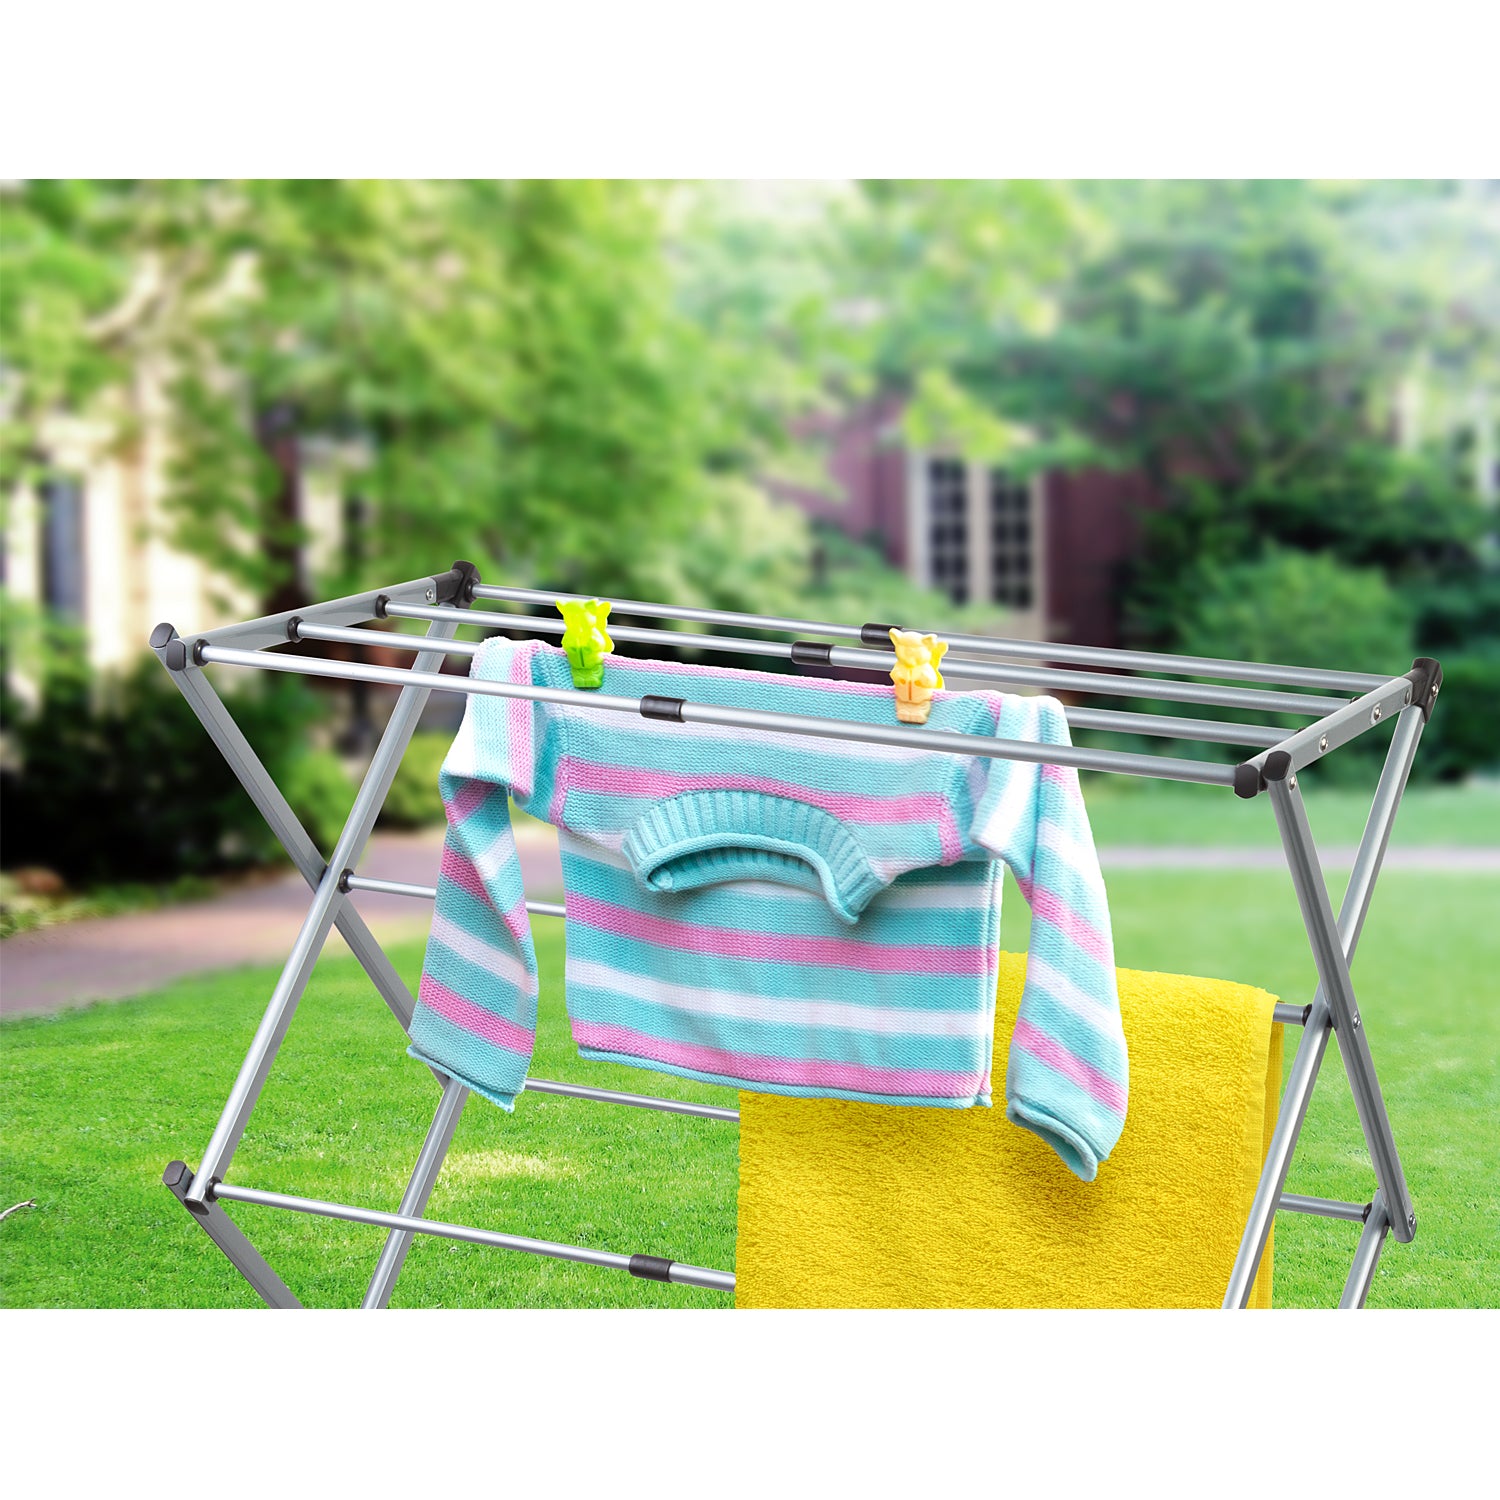 Foldable Drying Laundry Rack, Portable Clothes Horse Made of Rustproof Steel, art moon Gobi, 7